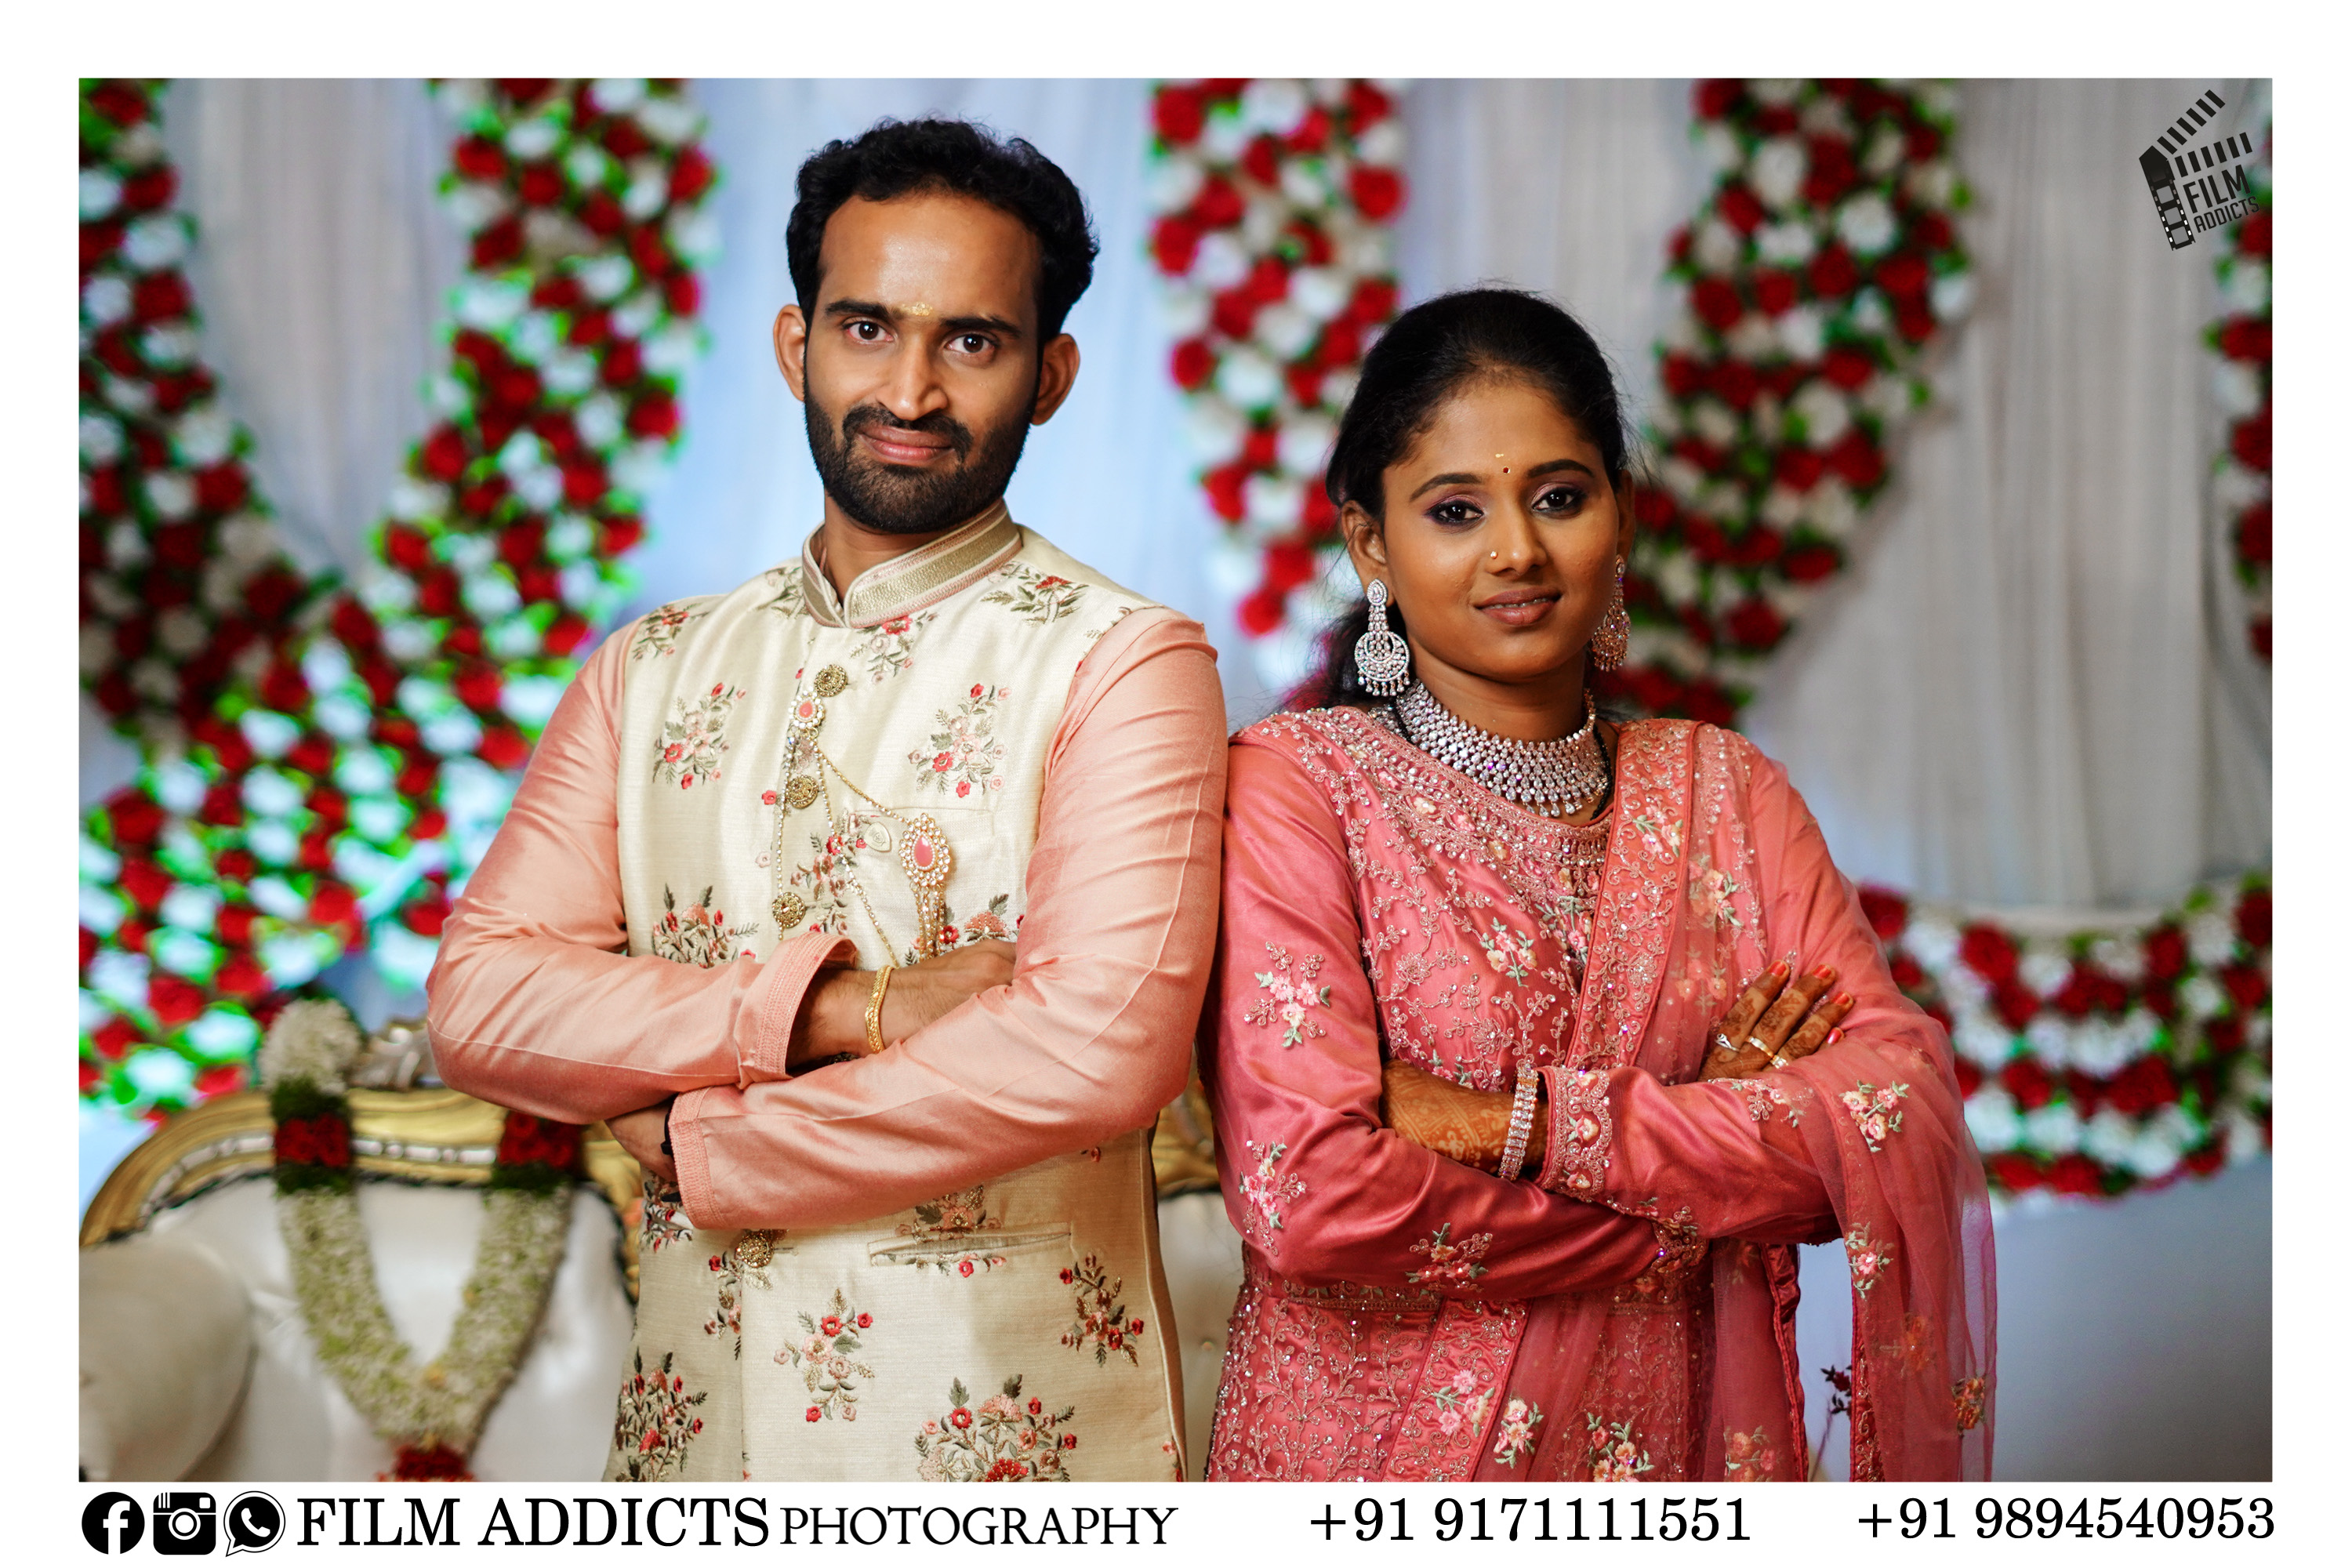 Best Candid Photographers in Thanjavur-FilmAddicts Photography,best Wedding photographers in Thanjavur,best candid photographers in Thanjavur,best Wedding photography in Thanjavur,best candid photography in Thanjavur, Best Wedding candid Photographers in Thanjavur, best marriage photographers in Thanjavur,best marriage photography in Thanjavur,best photographers in Thanjavur,best photography in Thanjavur,best Wedding candid photography in Thanjavur,best Wedding video in Thanjavur,best Wedding videographers in Thanjavur,best Wedding videography in Thanjavur,best candid videographers in Thanjavur,best candid videography in Thanjavur,best marriage videographers in Thanjavur,best marriage videography in Thanjavur,best videographers in Thanjavur,best videography in Thanjavur,best Wedding candid videography in Thanjavur,best Wedding candid videographers in Thanjavur,best helicam operators in Thanjavur,best drone operators in Thanjavur,best Wedding studio in Thanjavur,best professional photographers in Thanjavur,best professional photography in Thanjavur,No.1 Wedding photographers in Thanjavur,No.1 Wedding photography in Thanjavur,Thanjavur Wedding photographers,Thanjavur Wedding photography,Thanjavur Wedding videos,best candid videos in Thanjavur,best candid photos in Thanjavur,best helicam operators photography in Thanjavur,best helicam operator photographers in Thanjavur,best Wedding videography in Thanjavur.